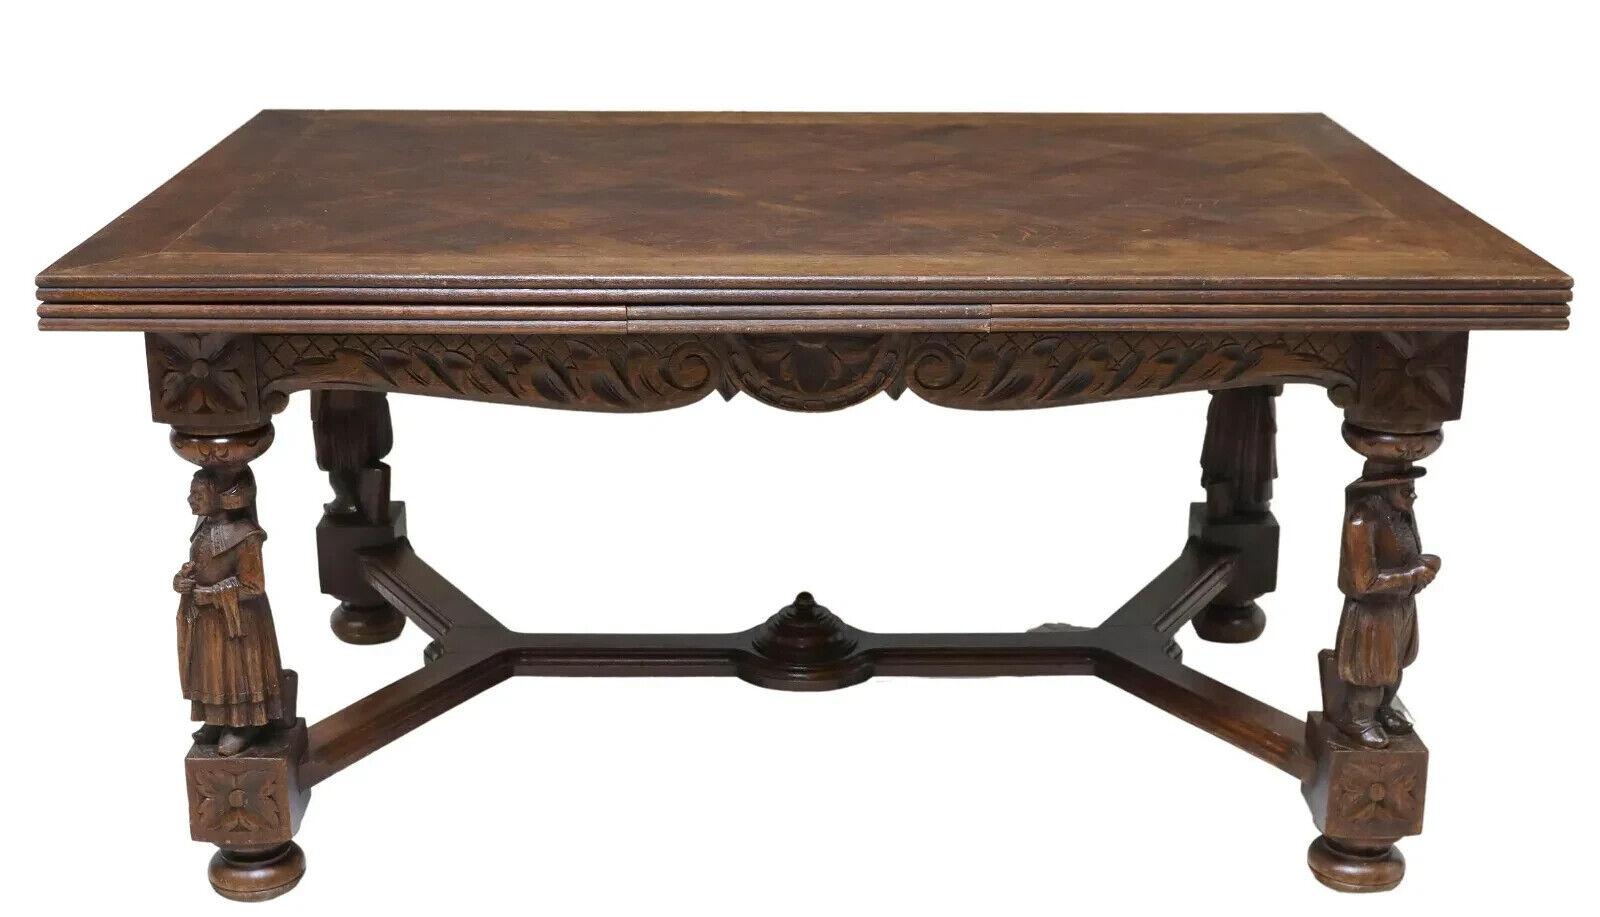 Gorgeous Antique Draw Leaf Table, French Breton, Figural, Carved, Oak, 18th / 19th Century, 1700s / 1800s!!
See also matching sideboard and chairs!!  (discount available when buying all as a set)

French oak draw-leaf table, Brittany, early 20th c.,